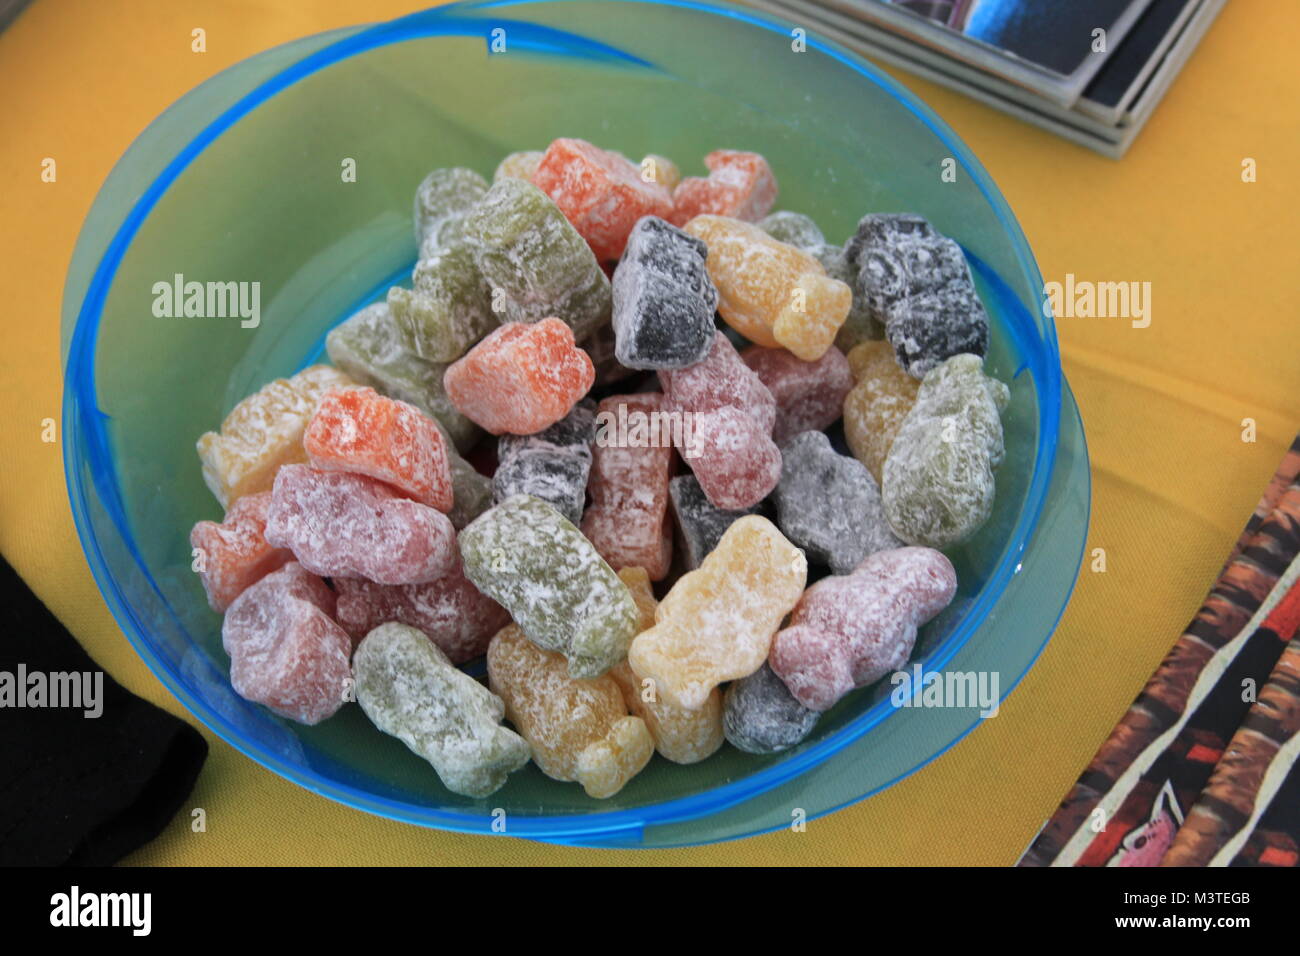 Blue plastic bowl filled with colourful jelly baby sweets on a light coloured wooden table. Jelly babies are traditional British jelly sweets. Stock Photo